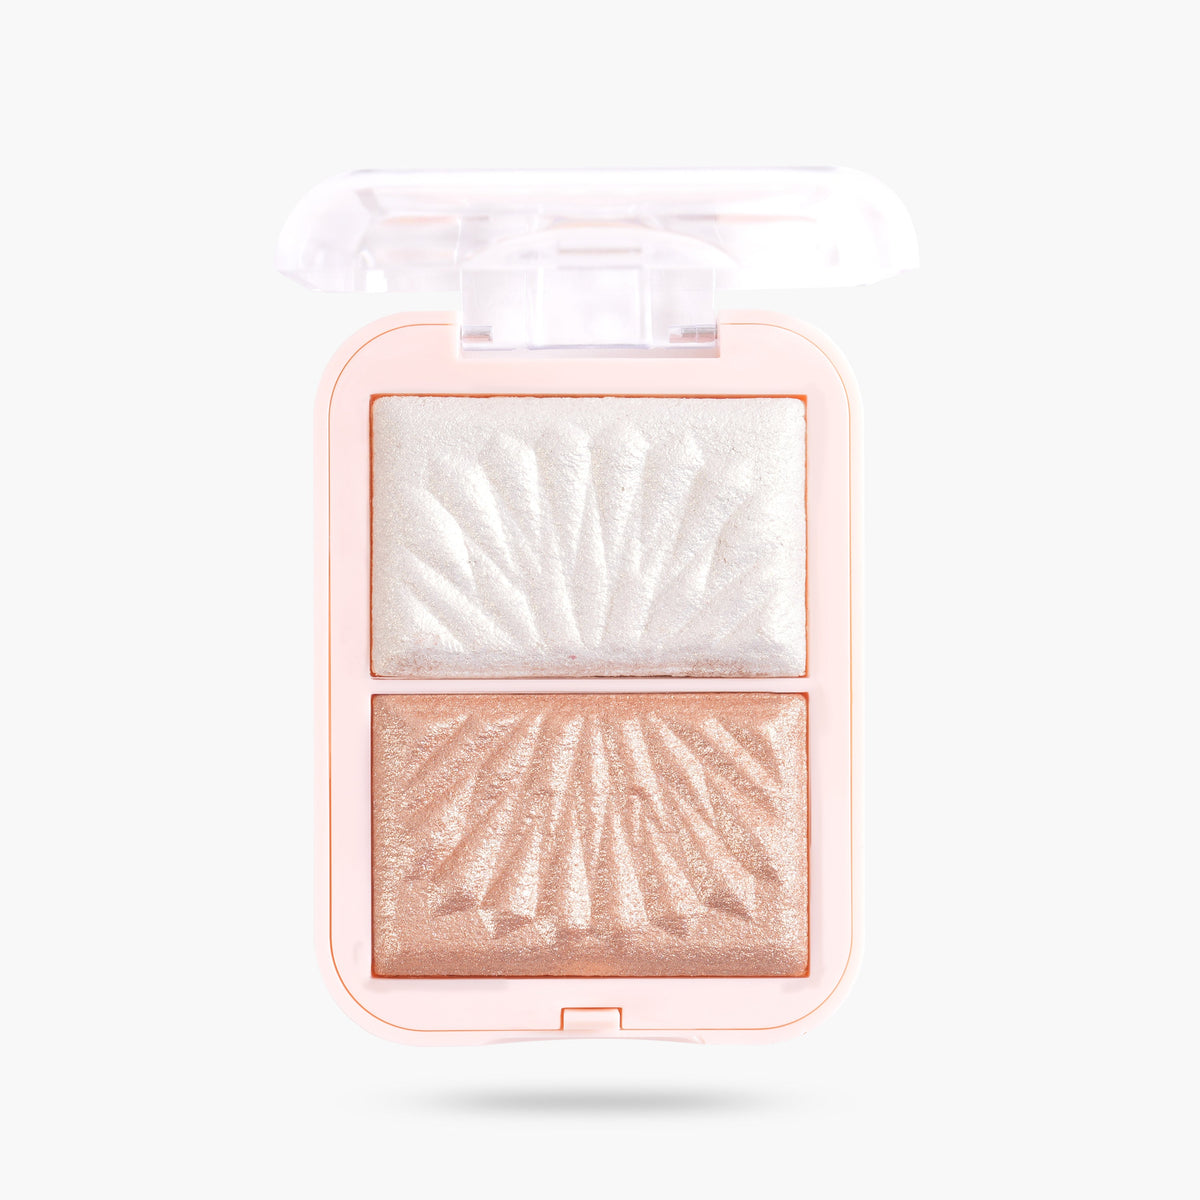 Shryoan Soft Touch Backed Highlighter & Blush